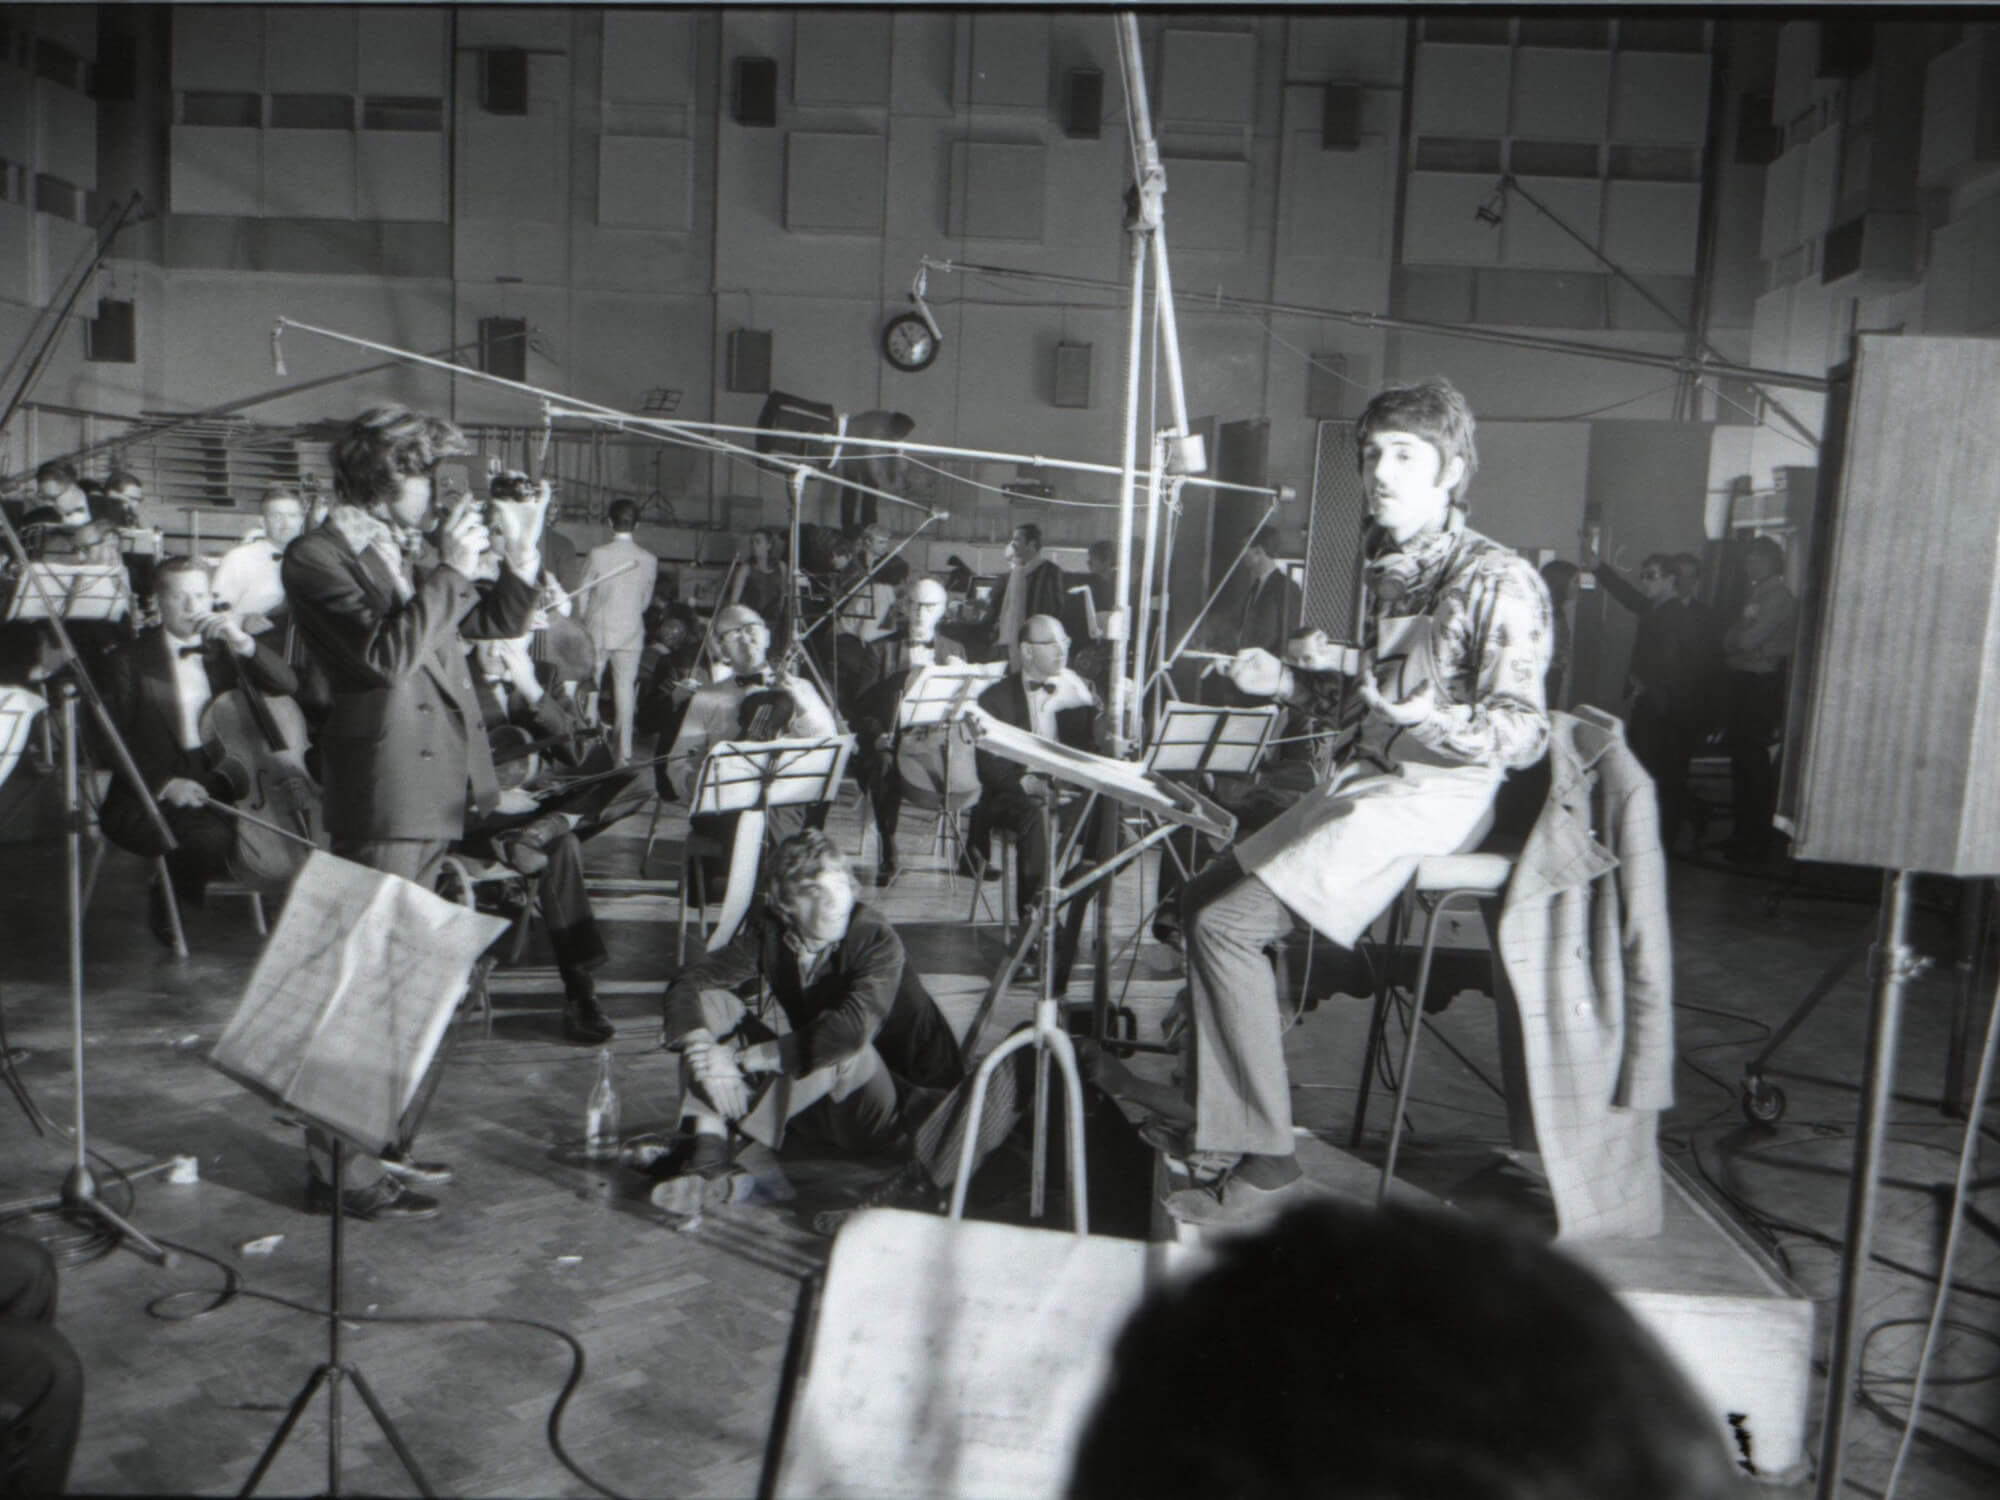 Watch: Trailer for new Abbey Road Studios documentary now out